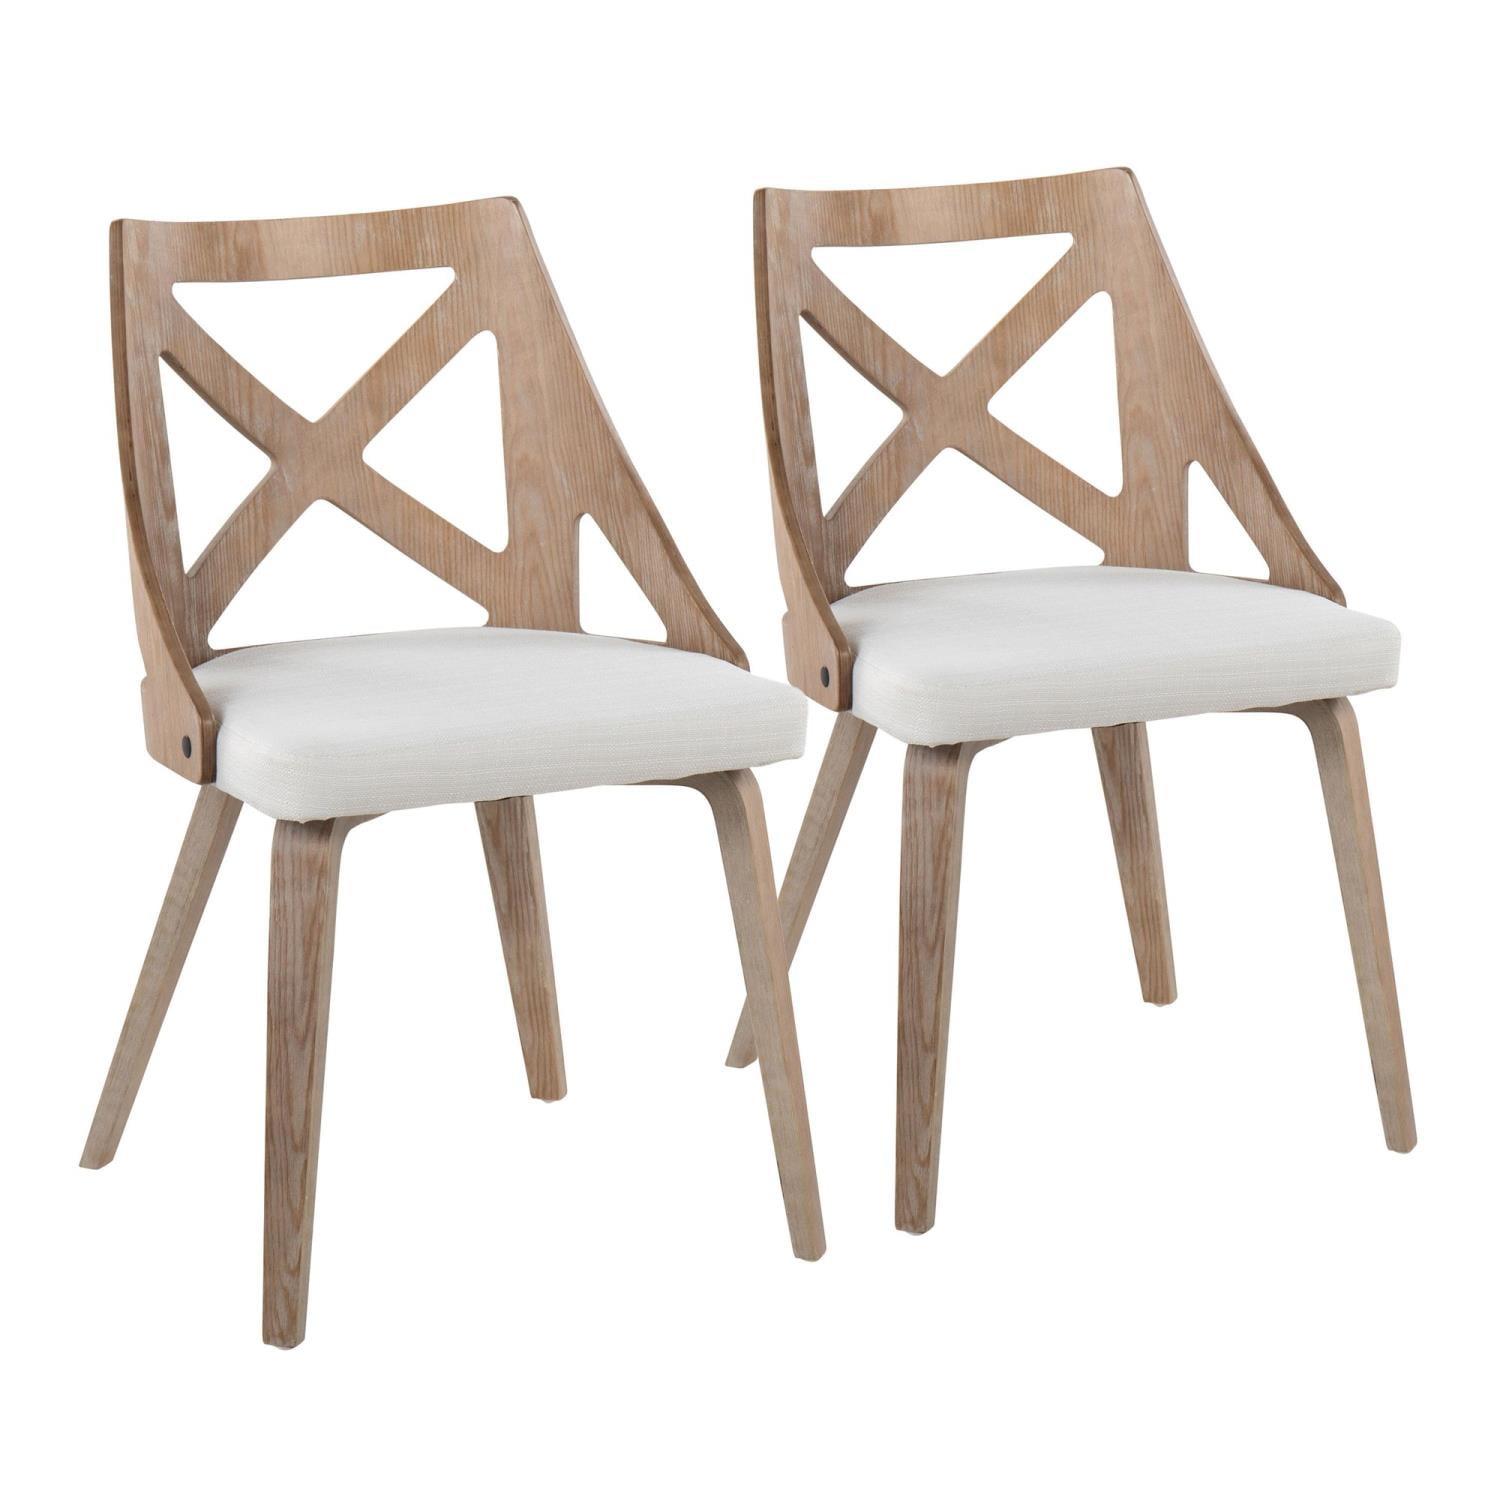 Charlotte White Washed Wood and Cream Upholstered Dining Chairs, Set of 2